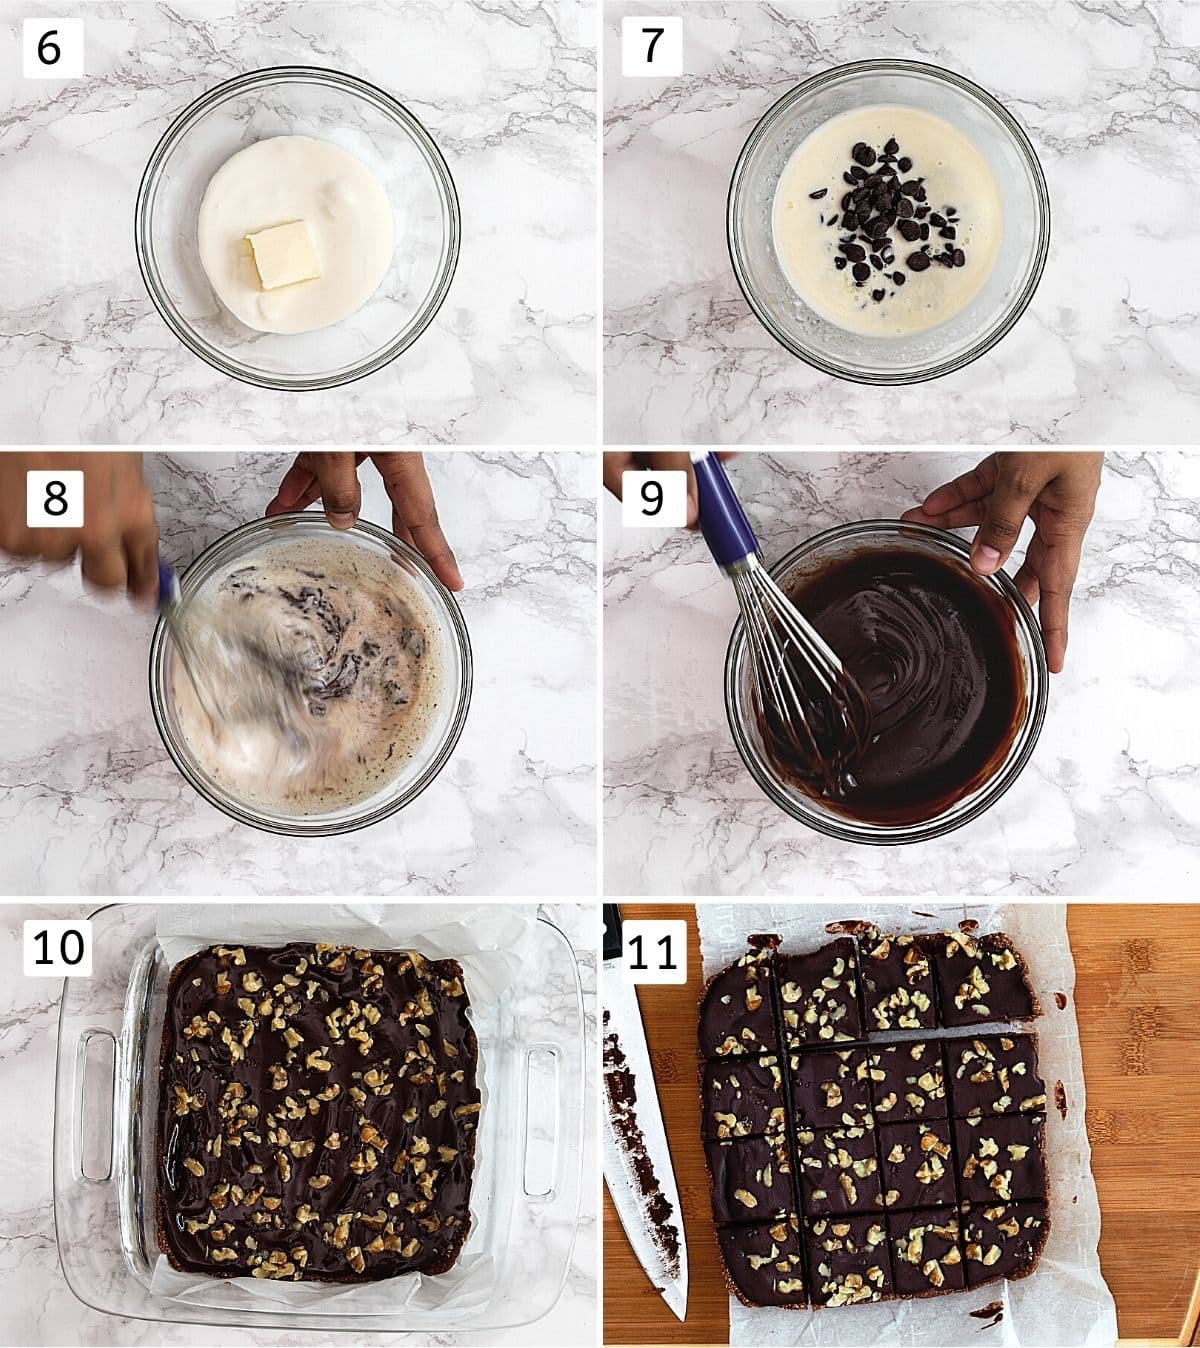 Collage of 6 steps showing making ganache, spreading over brownies, garnished with walnuts and cutting into pieces.